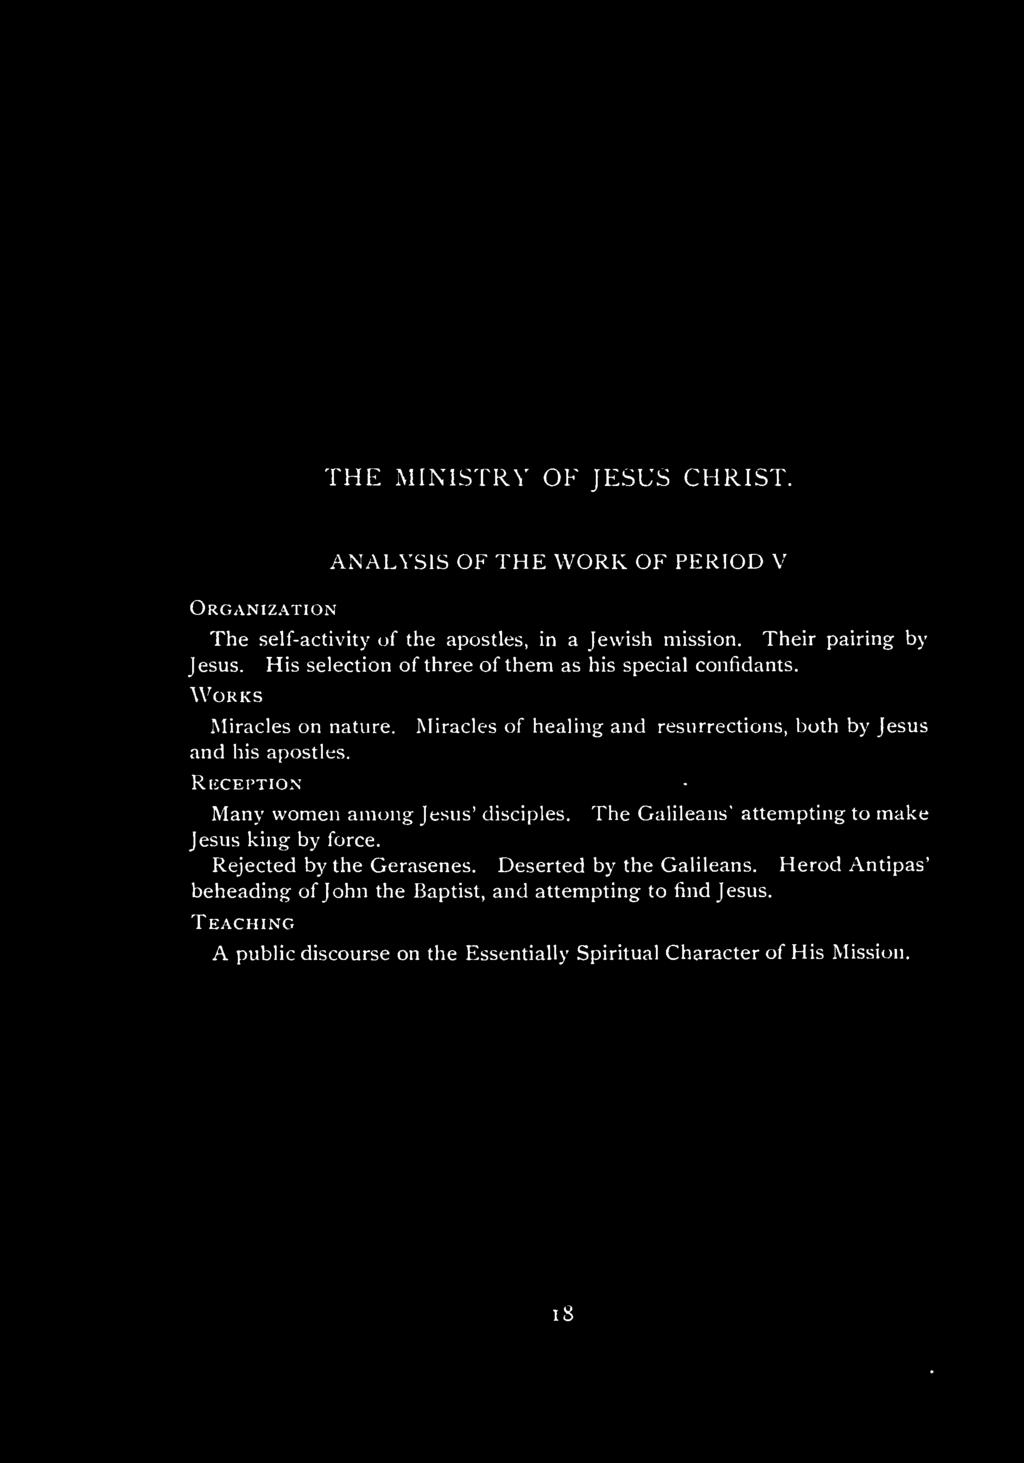 THE MINISTRY OF JESUS CHRIST. Organization ANALYSIS OF THE WORK OF PERIOD V The self-activity of the apostles, in a Jewish mission. Their pairing by Jesus.